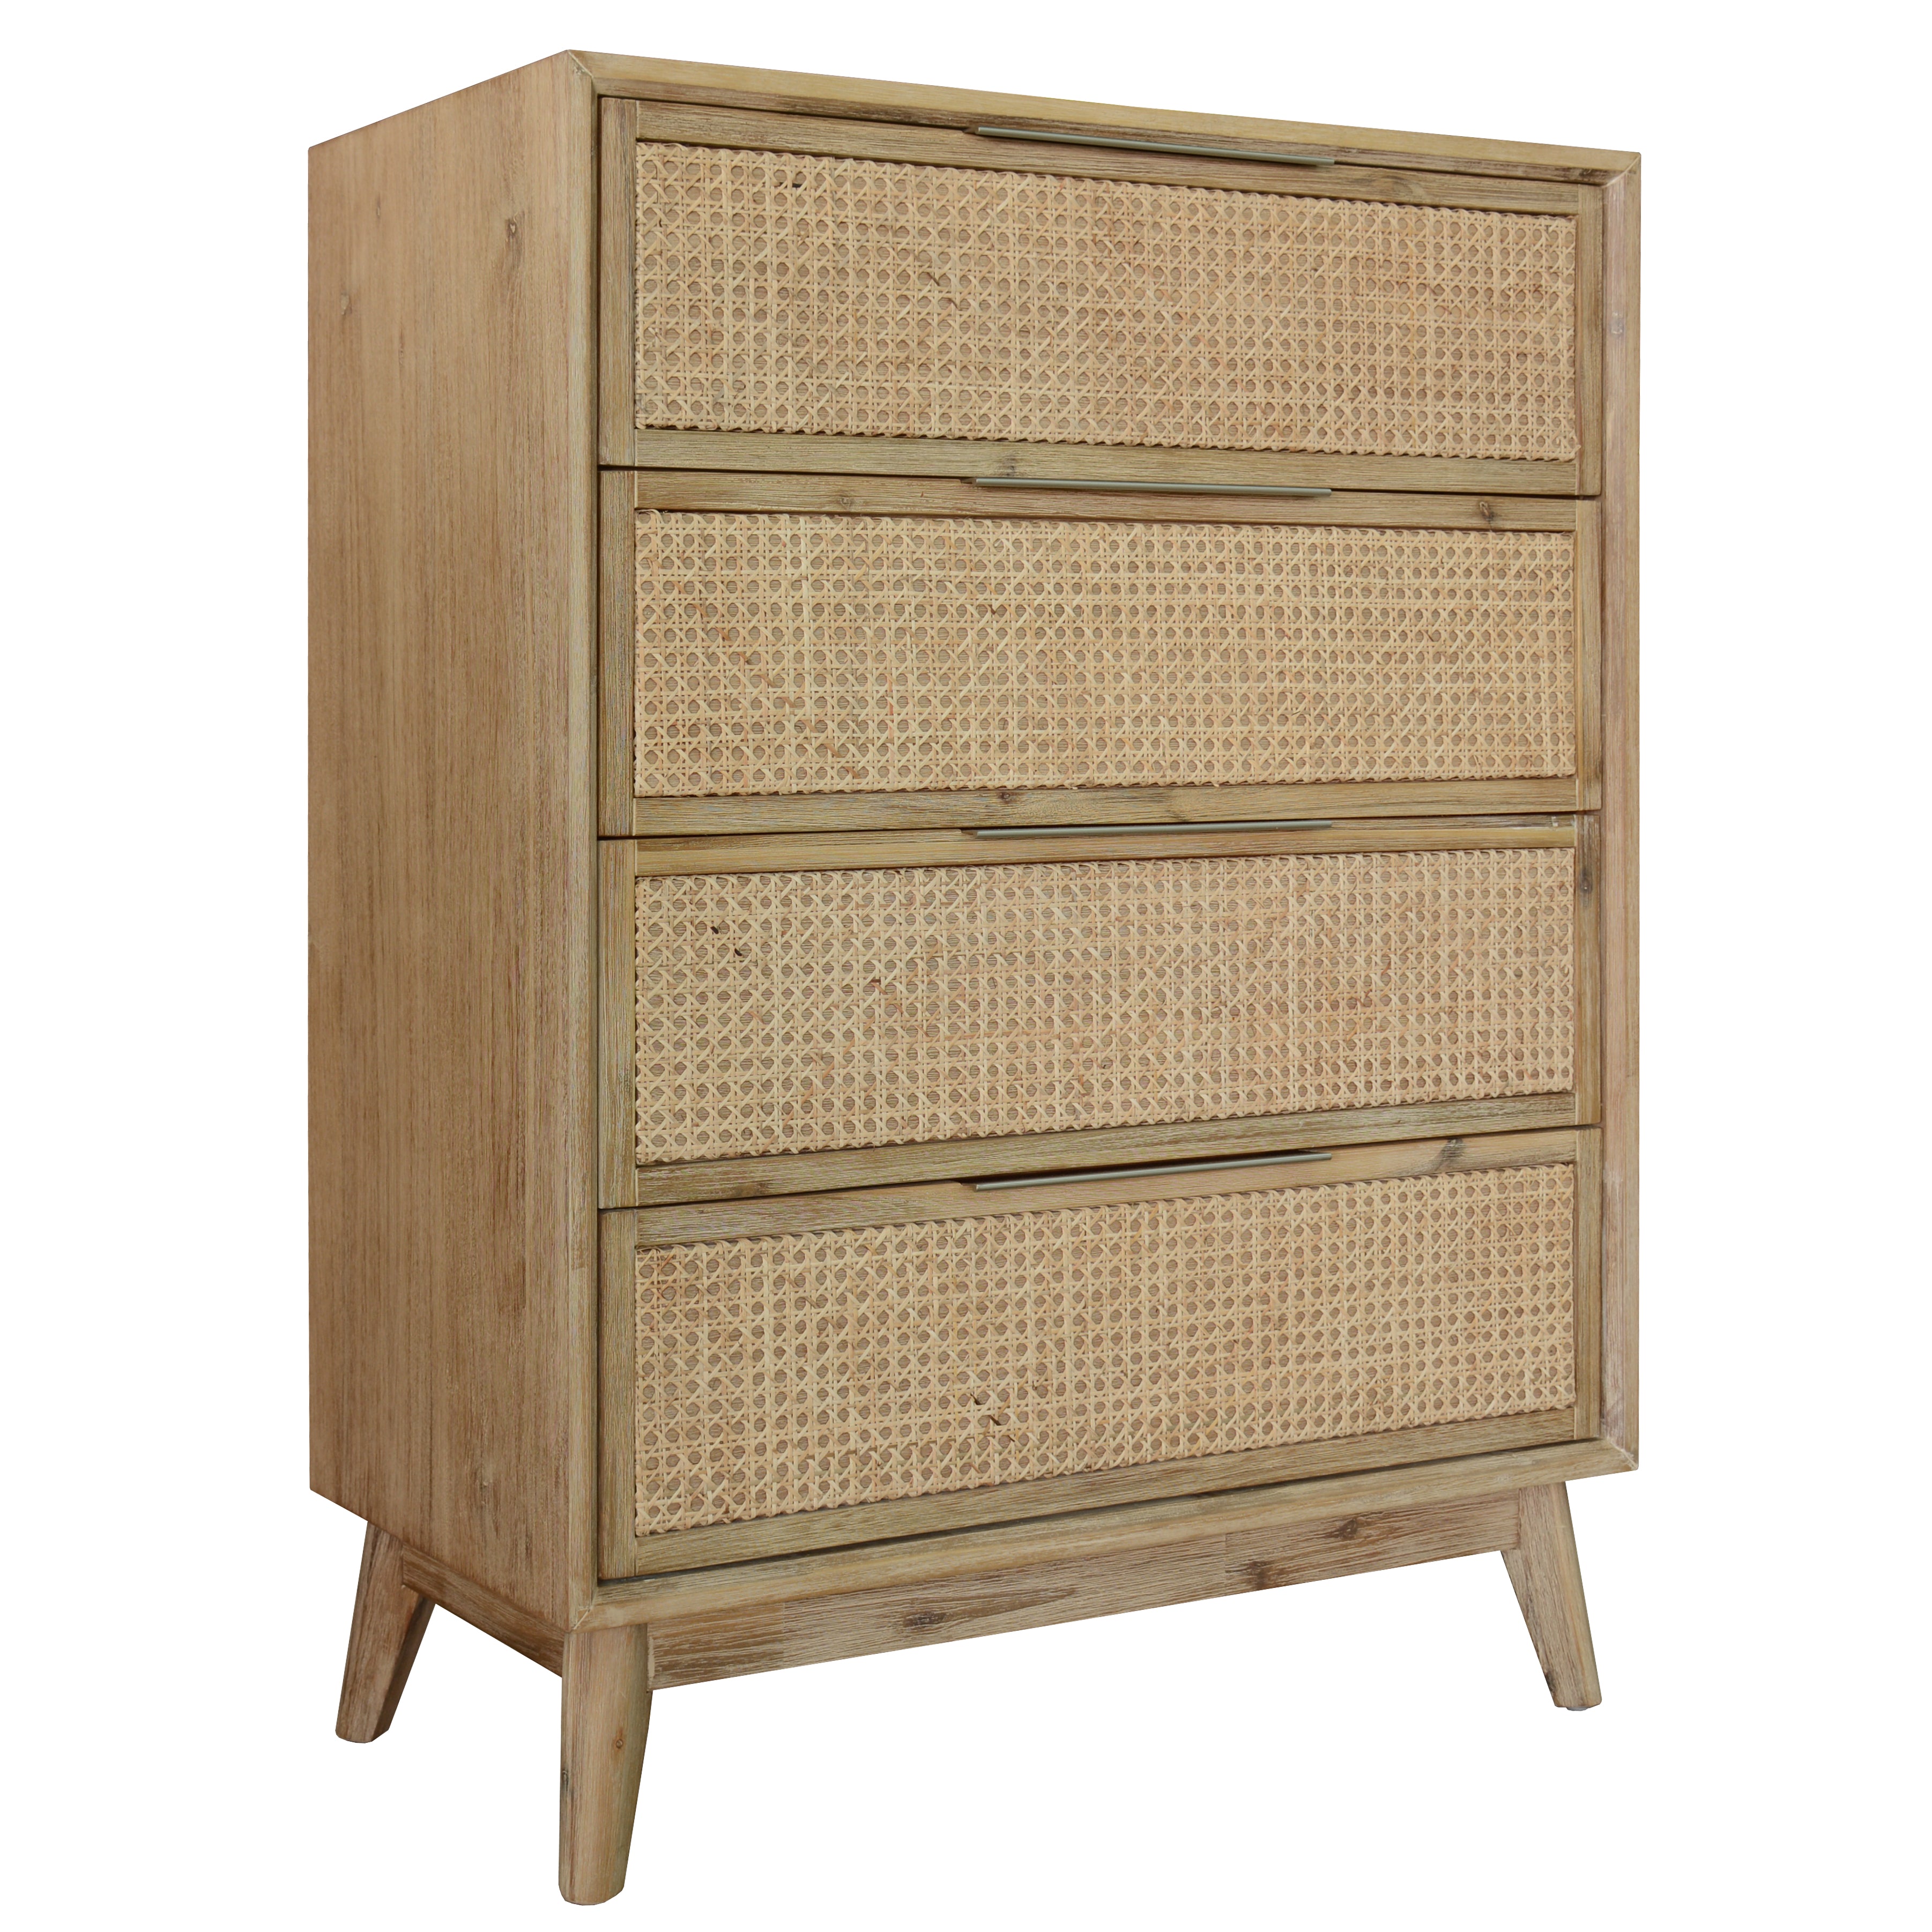 Grevillea Tallboy 4 Chest of Drawers Solid Acacia Wood Storage Cabinet - Brown Deals499